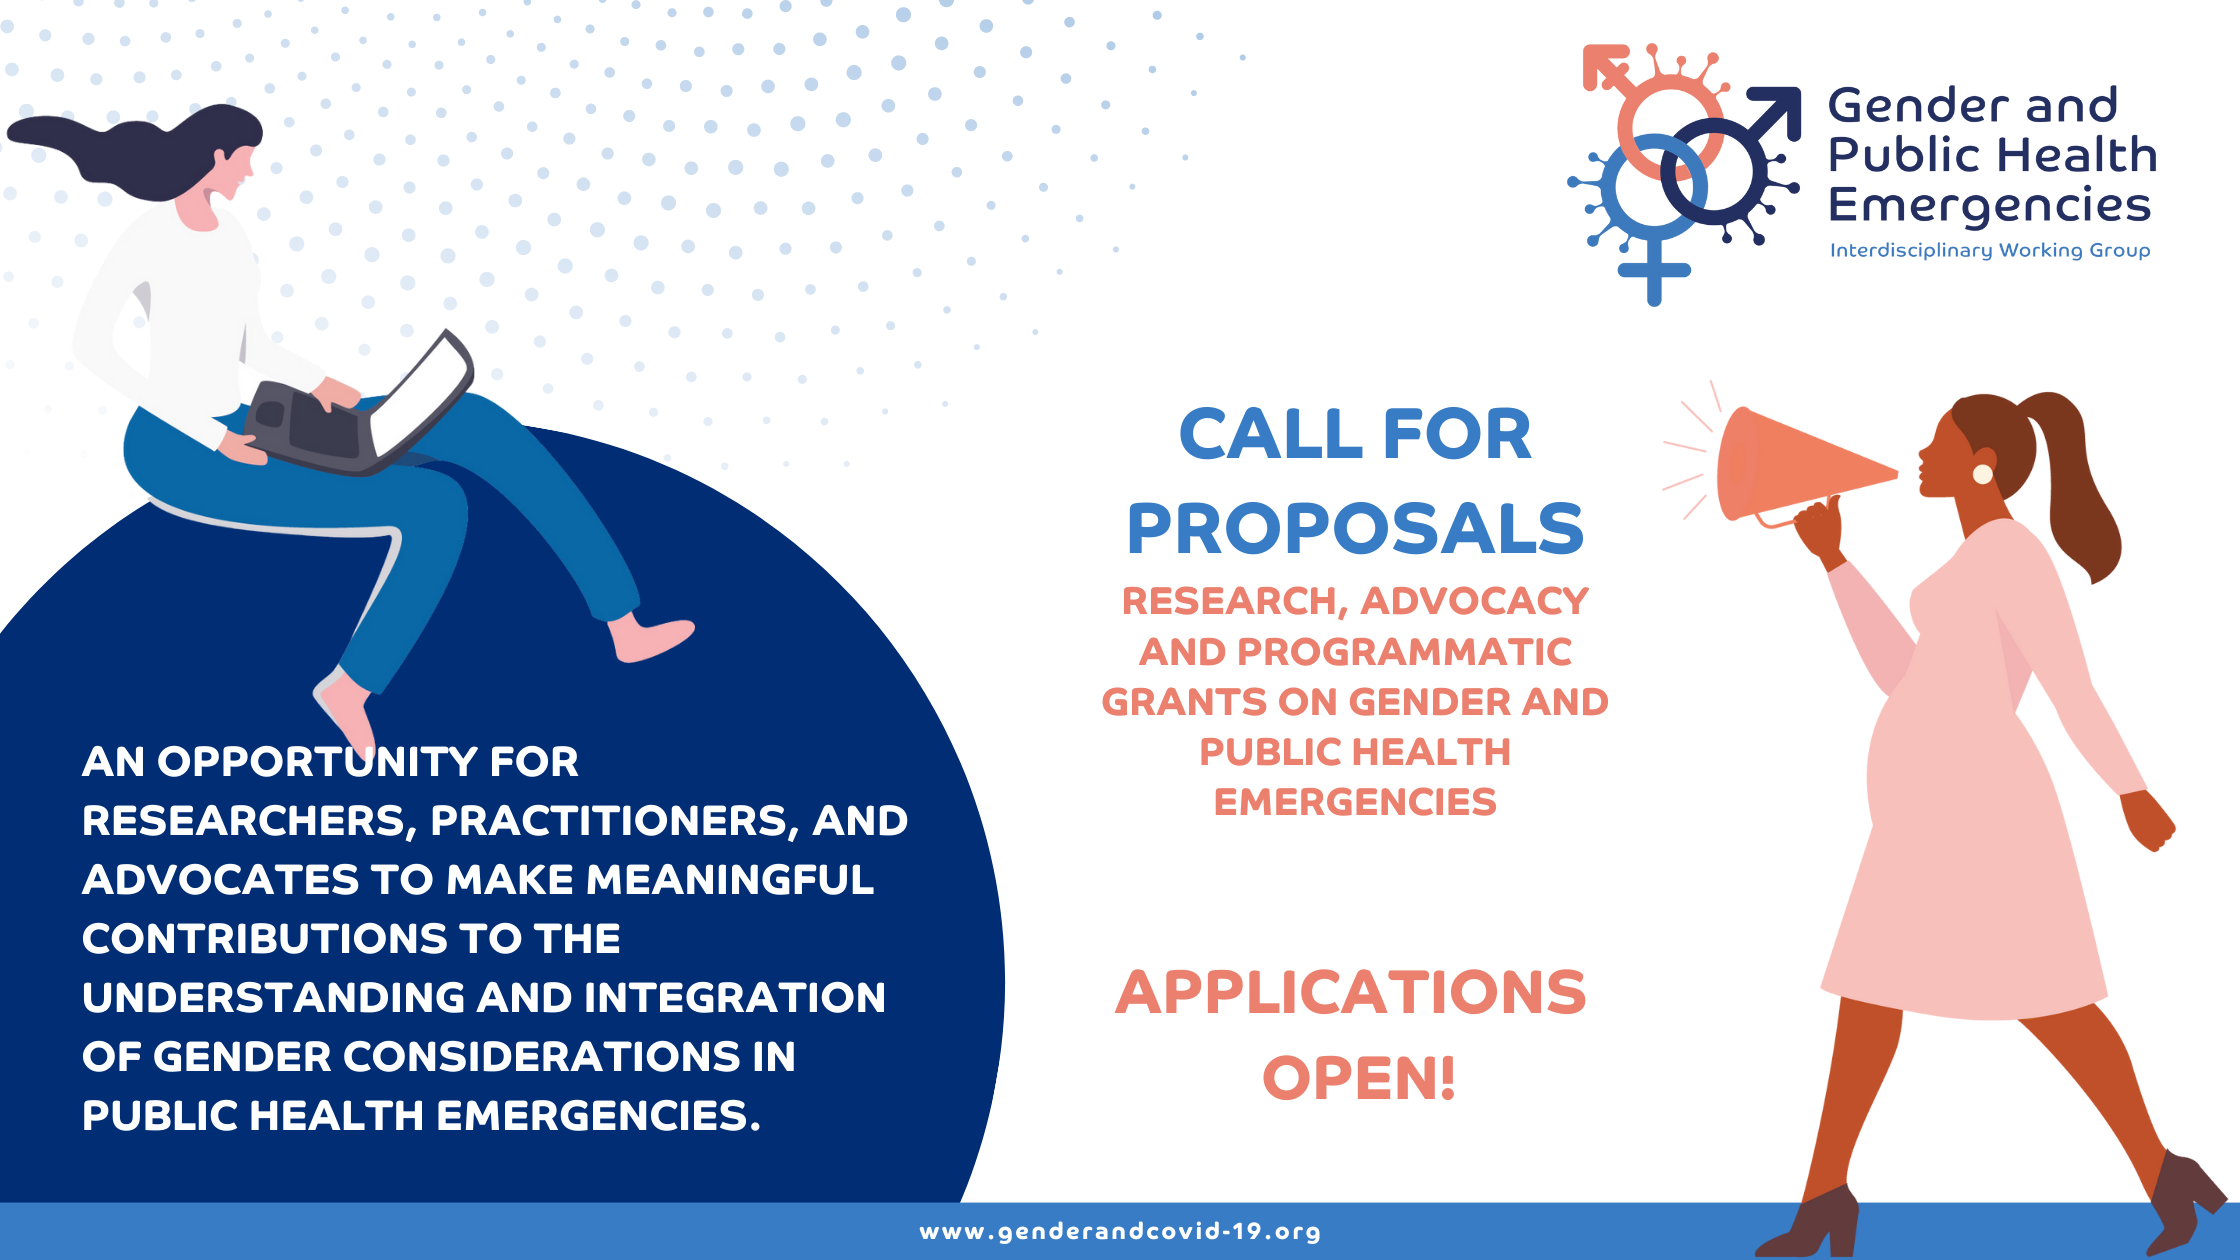 Call for proposals: Research, advocacy and programmatic grants on gender and public health emergencies